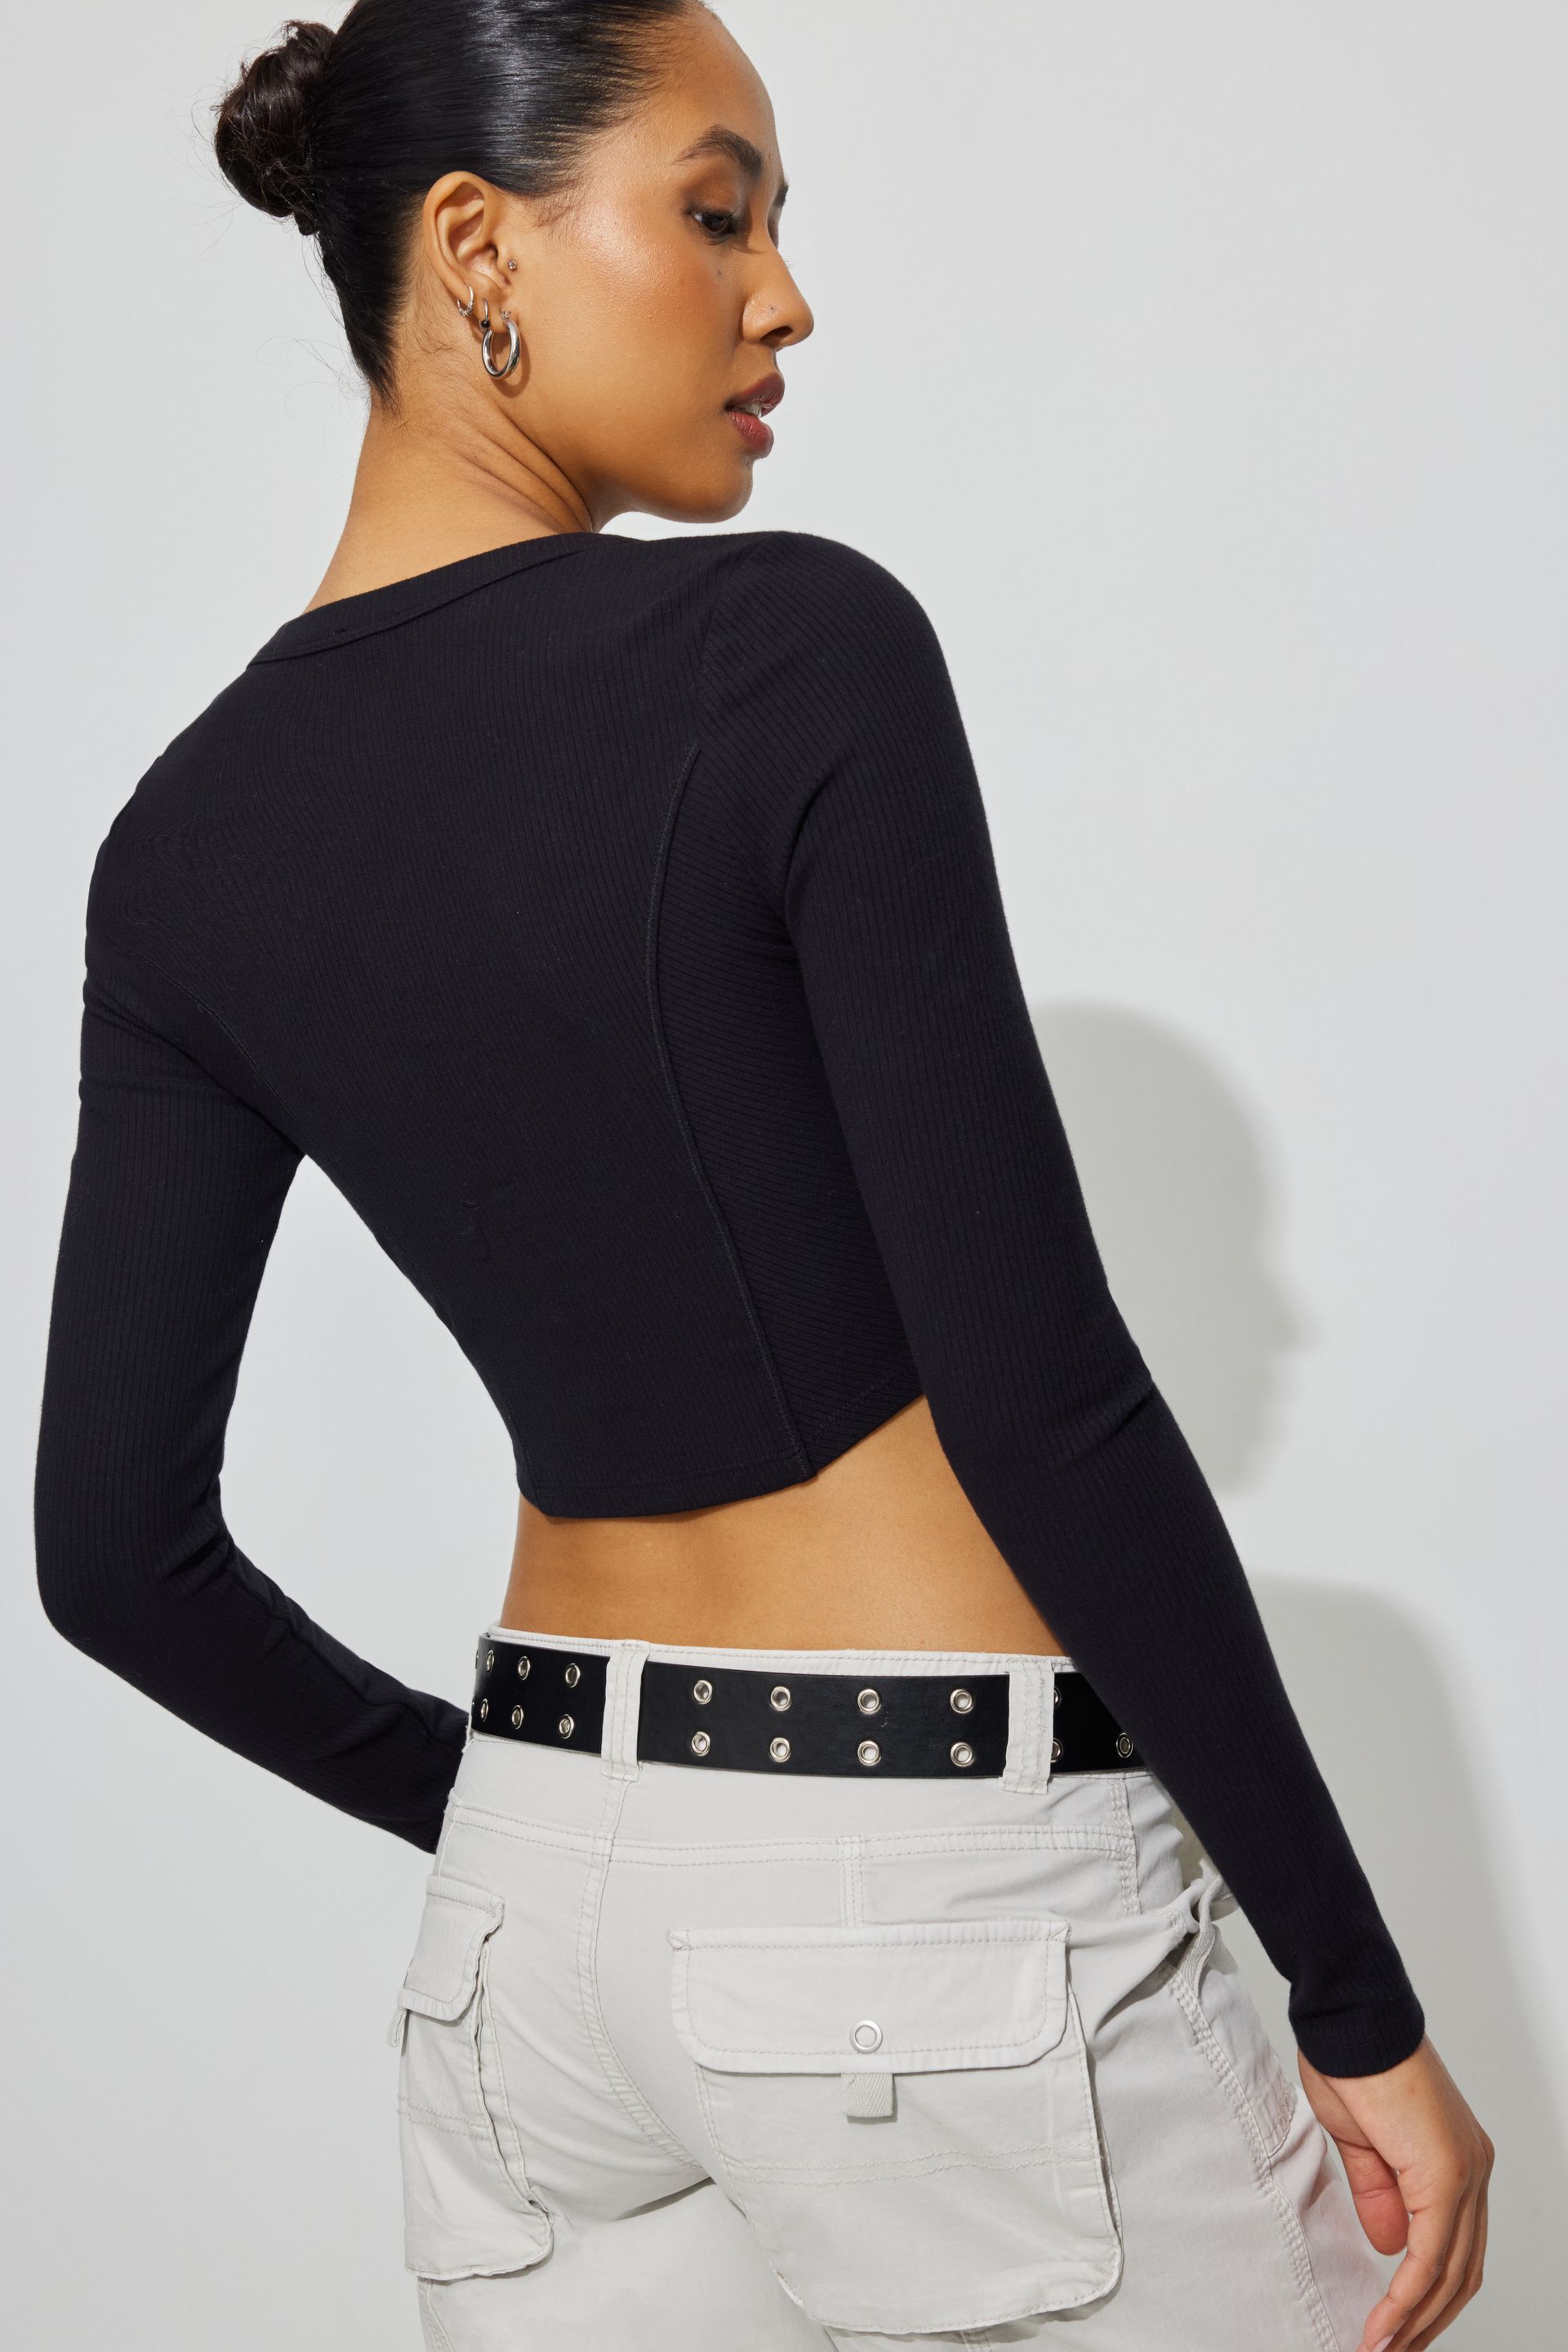 Notch Front Long Sleeve Top Black